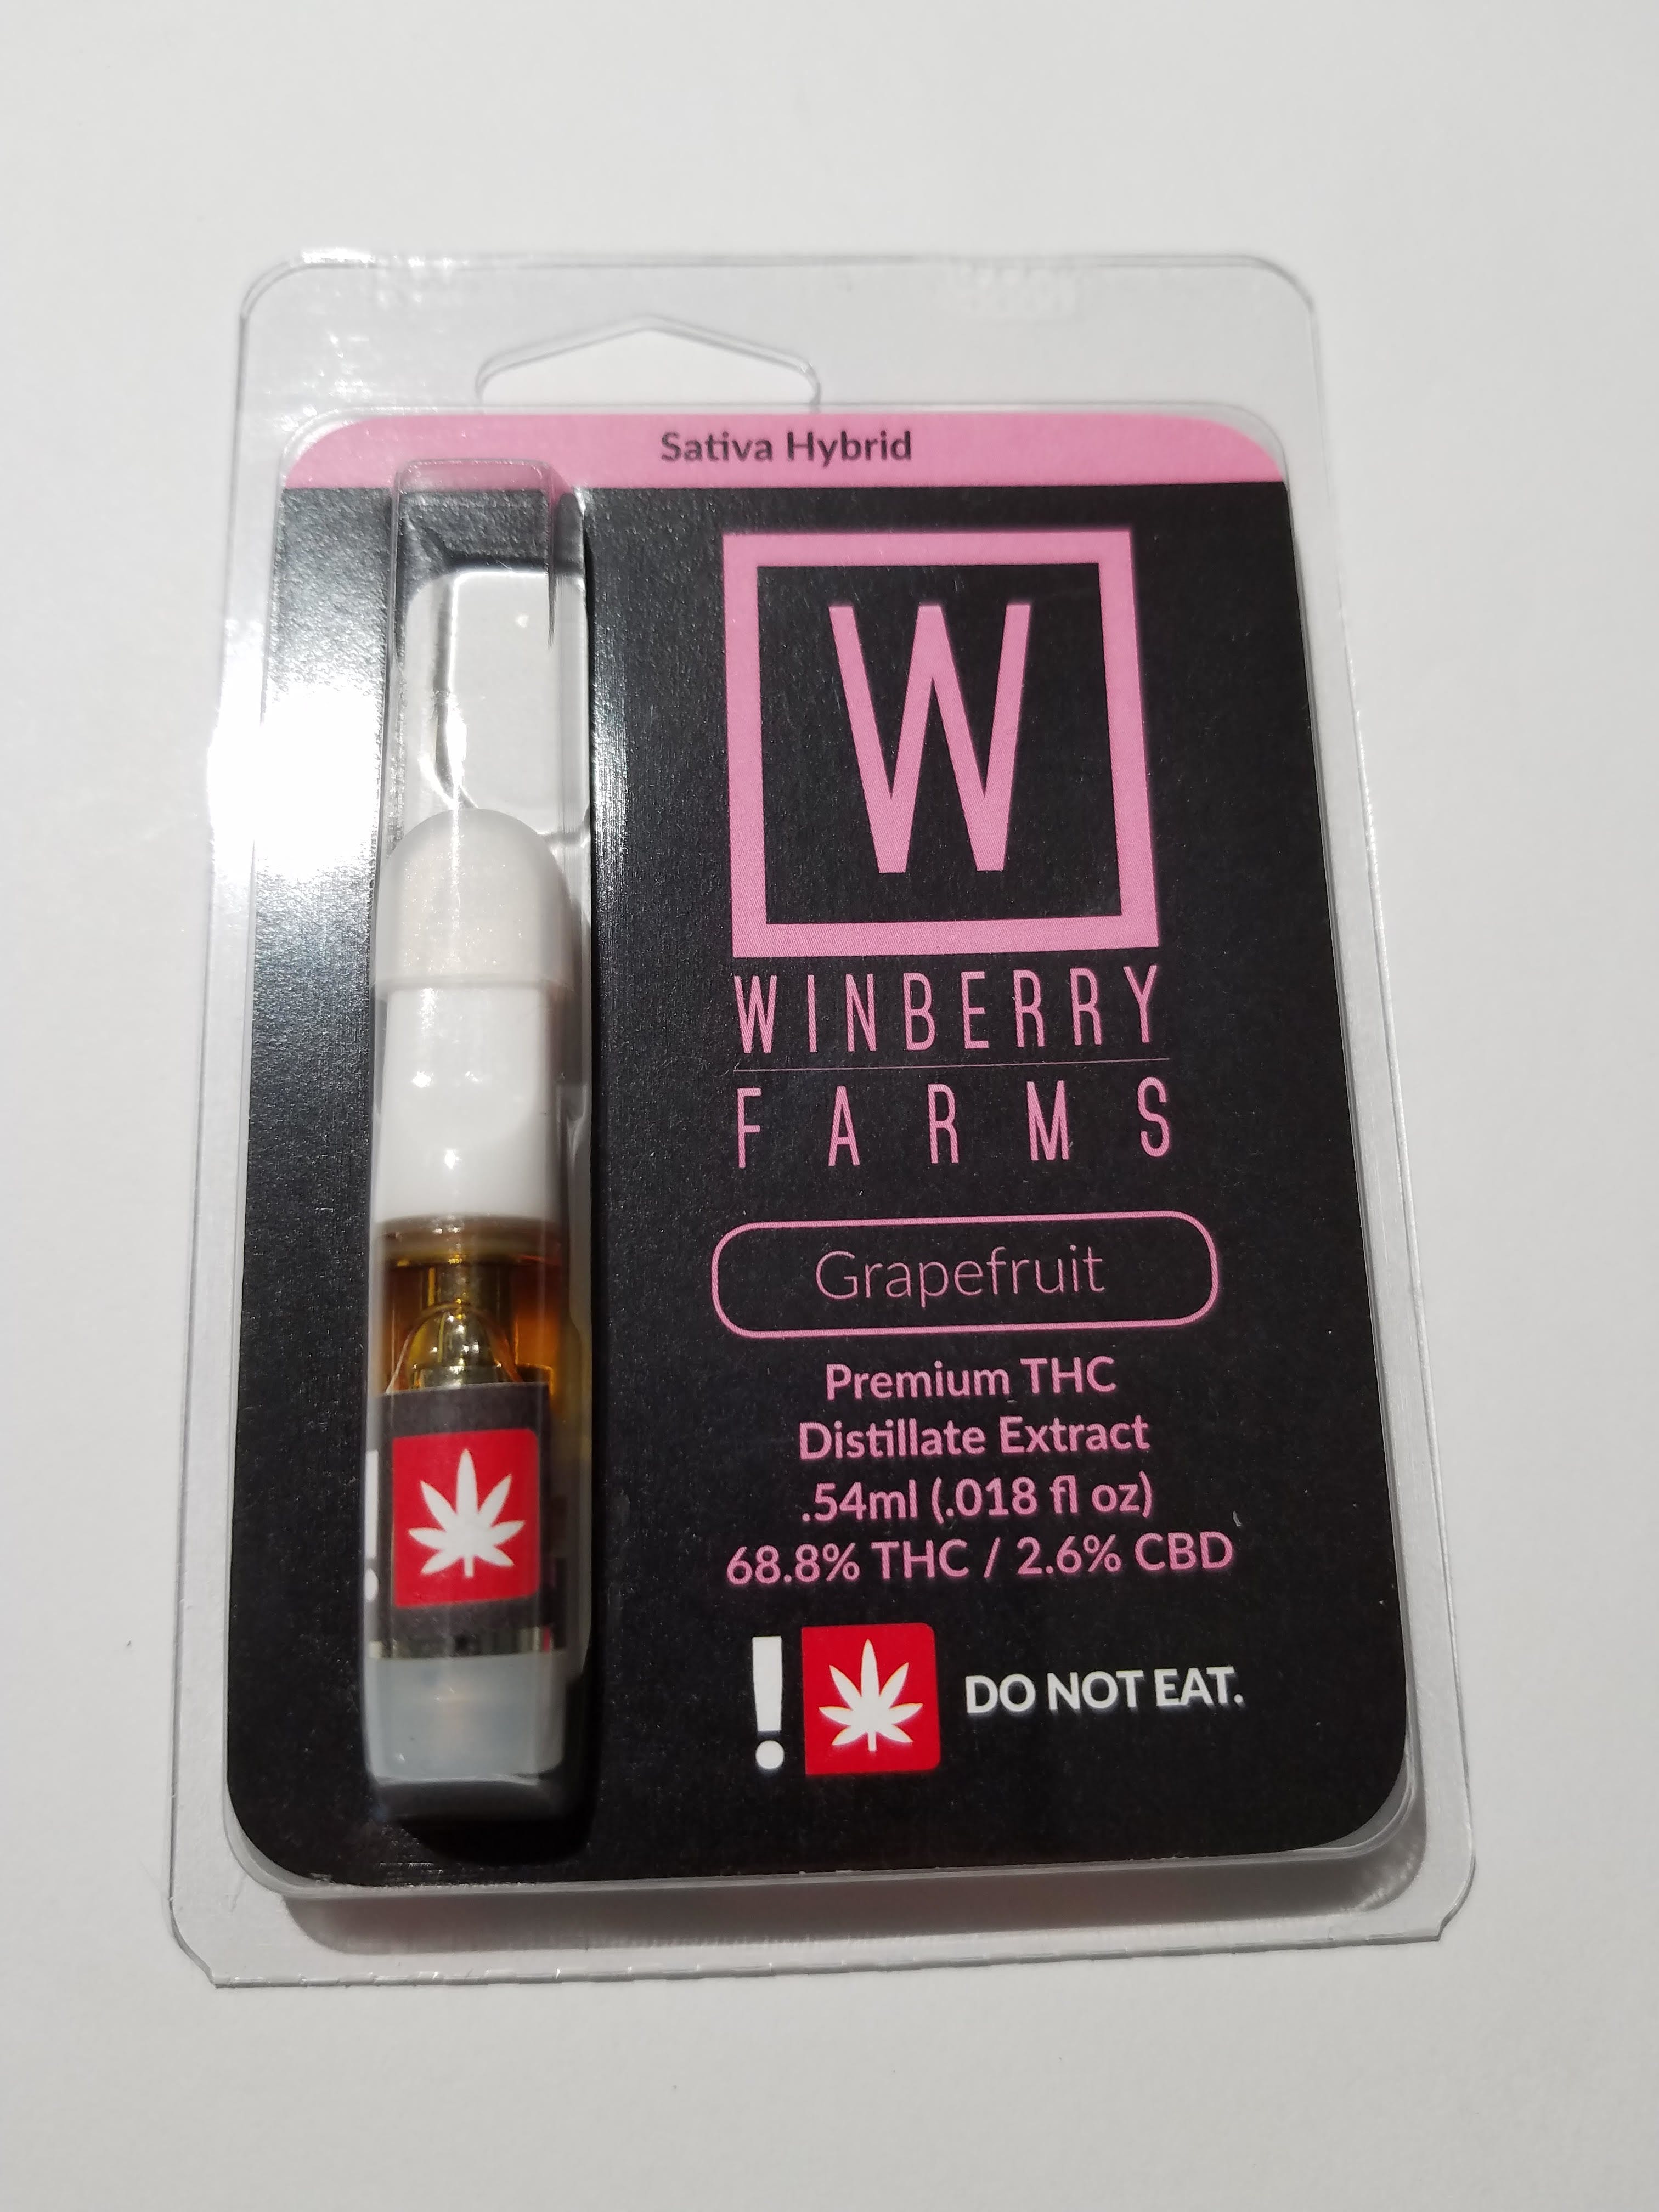 concentrate-5g-grapefruit-cartridge-winberry-farms